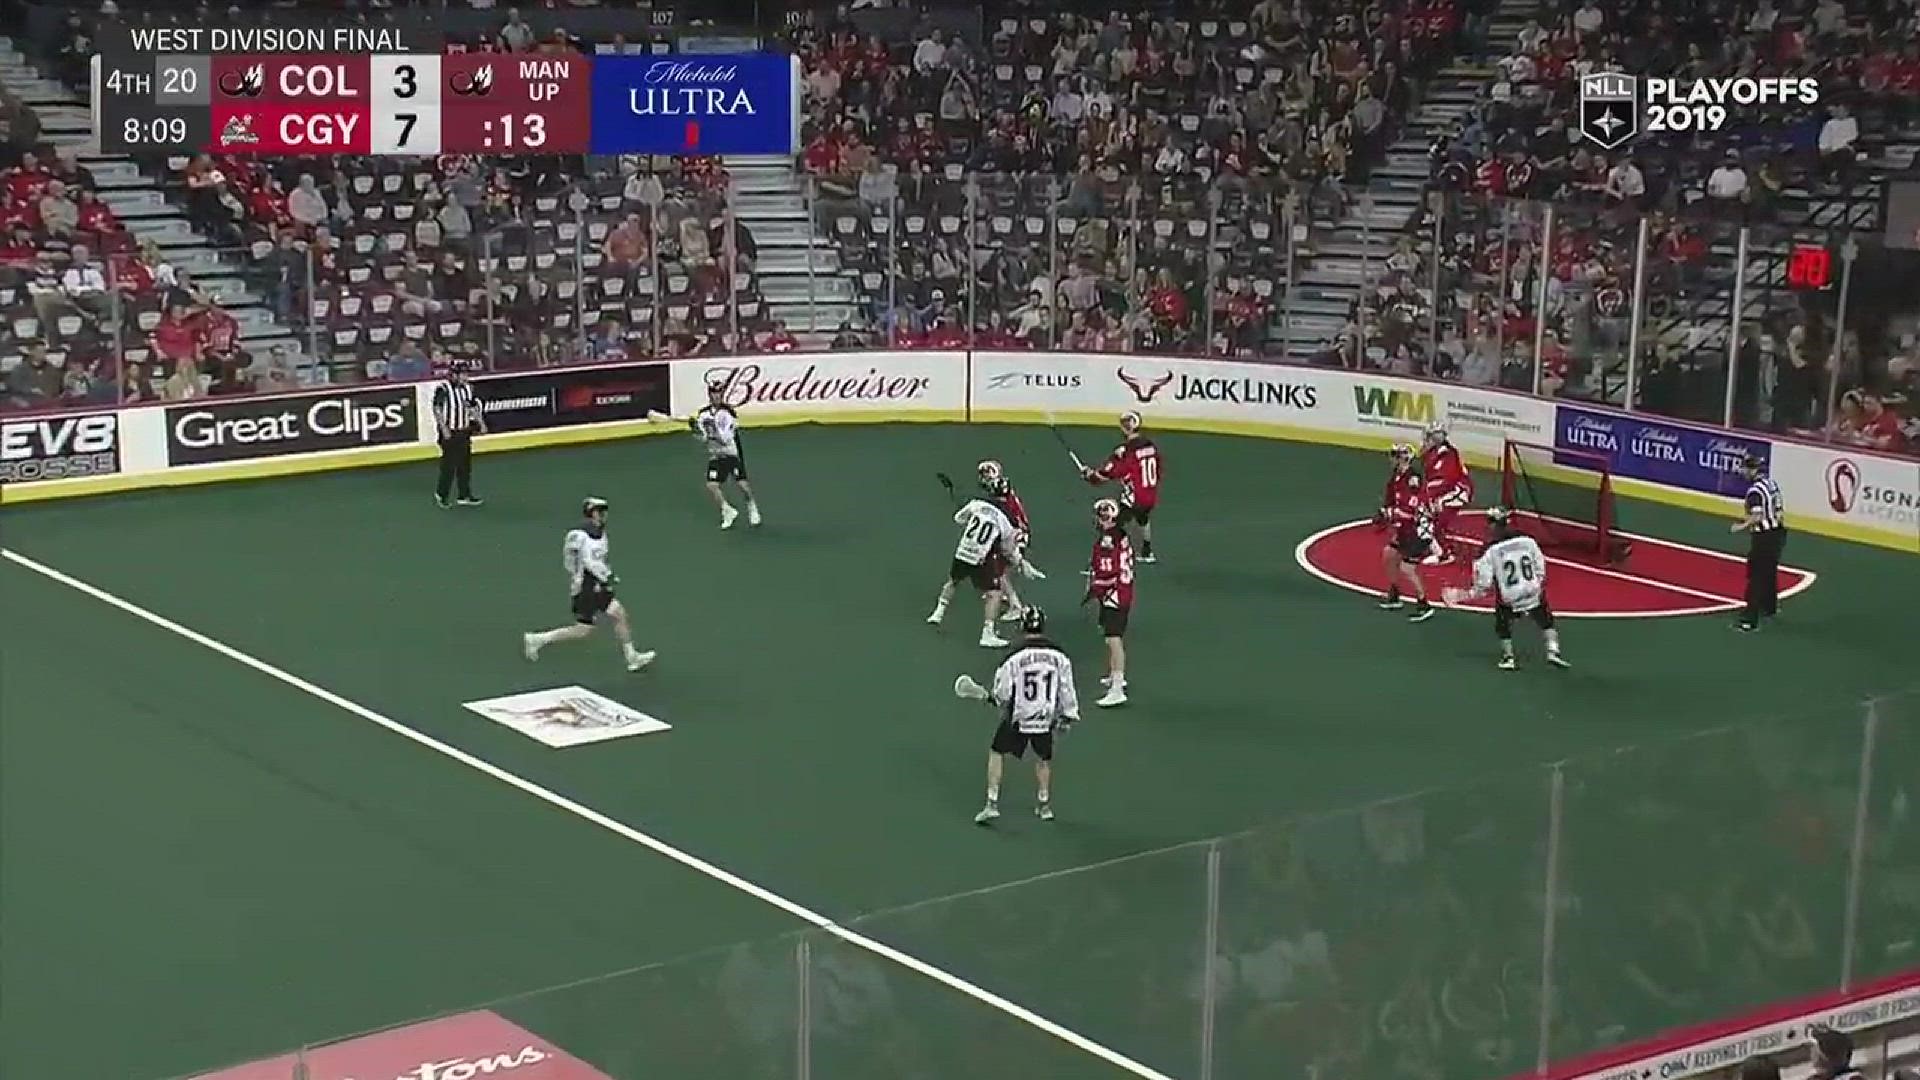 Colorado Mammoth fall to Calgary Roughnecks 8-4 in NLL playoffs at Scotiabank Saddledome.